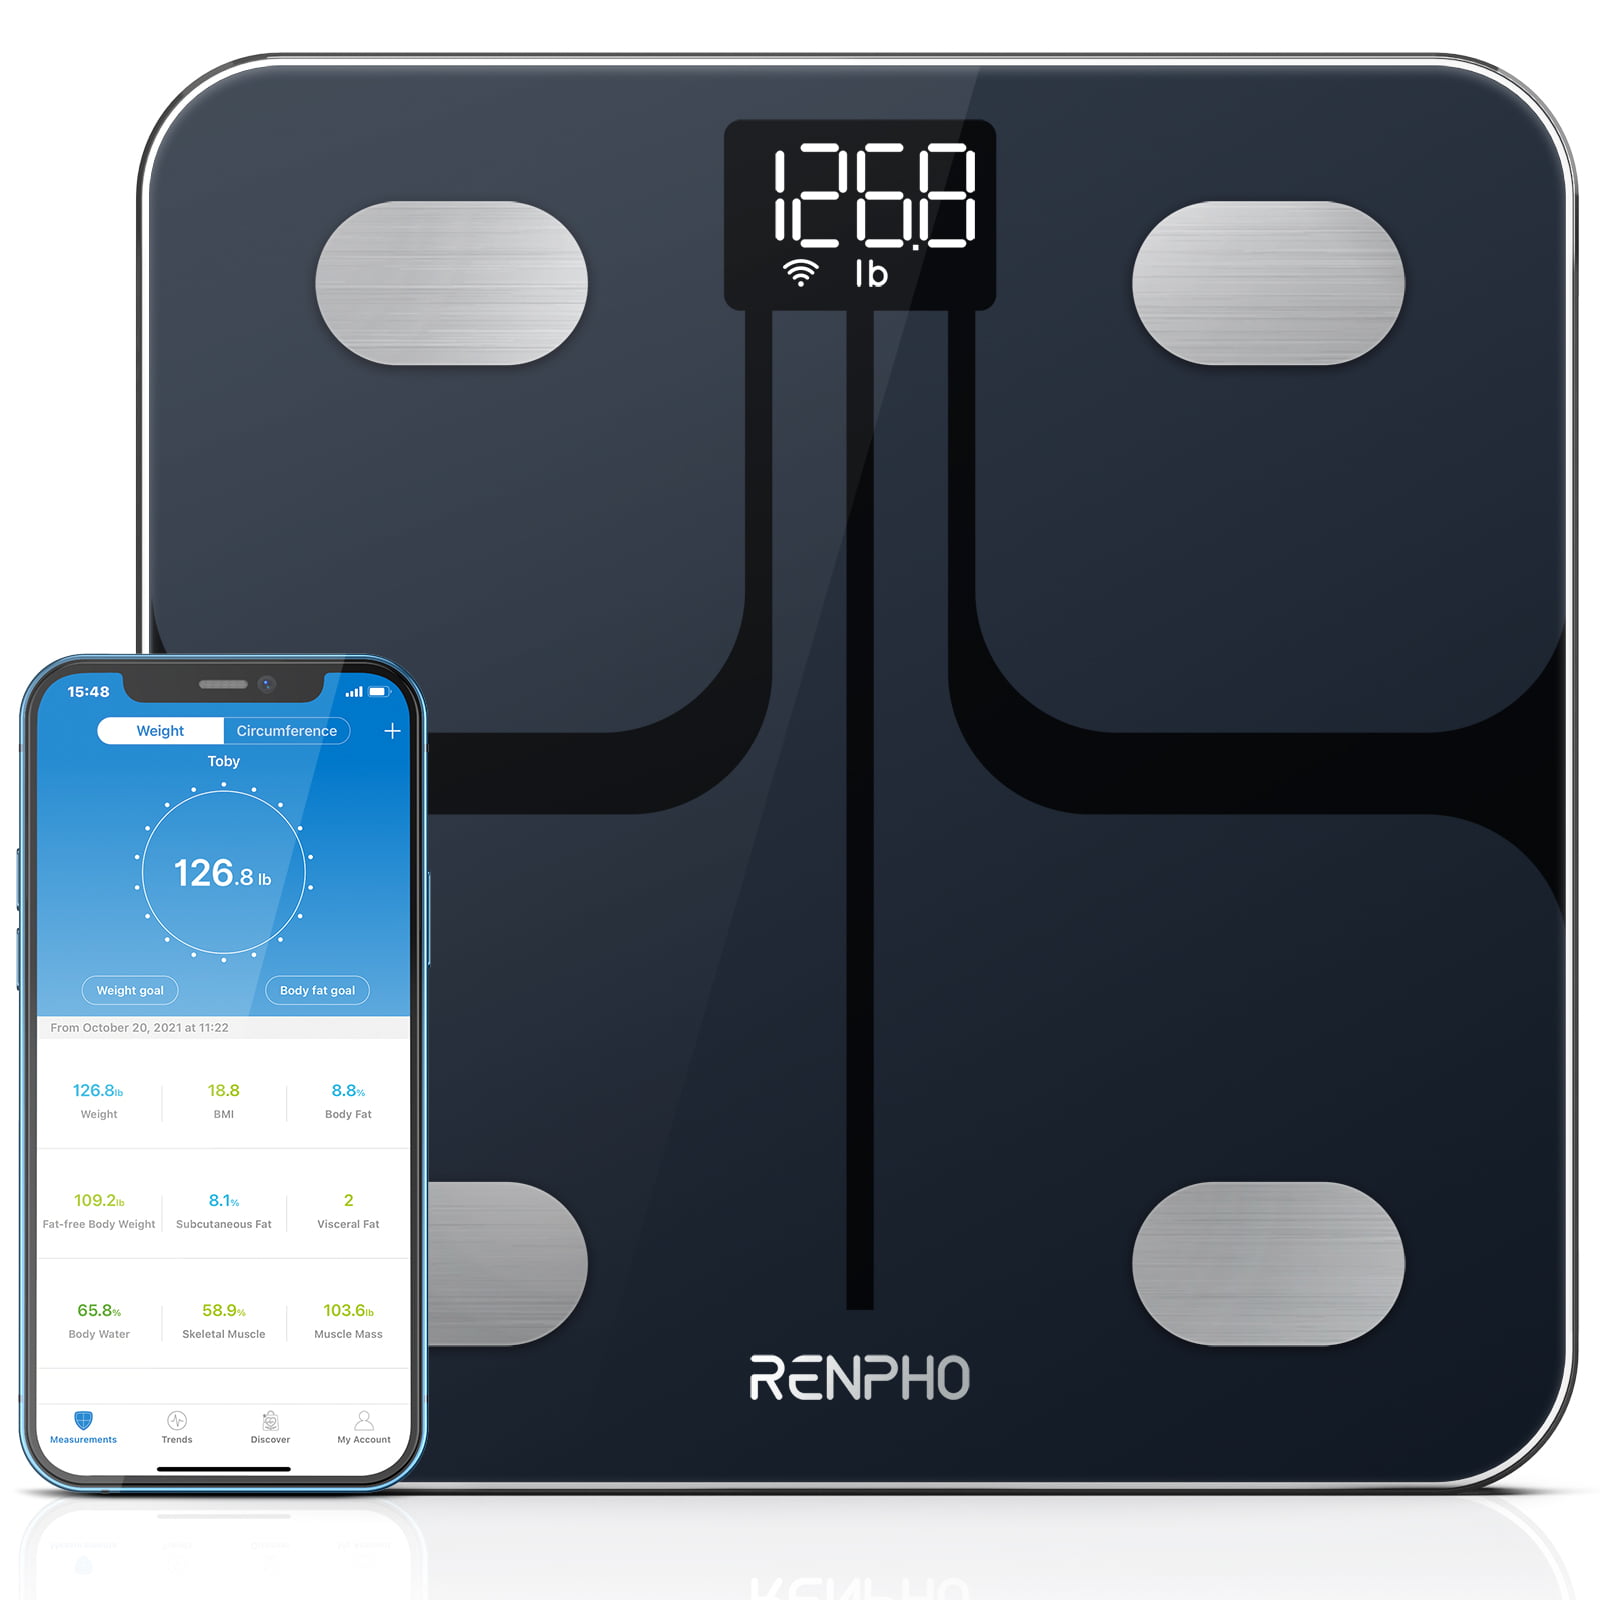 Bathroom Bluetooth Glass Scales BMI Body Fat Monitor Weighing IOS Android UK 